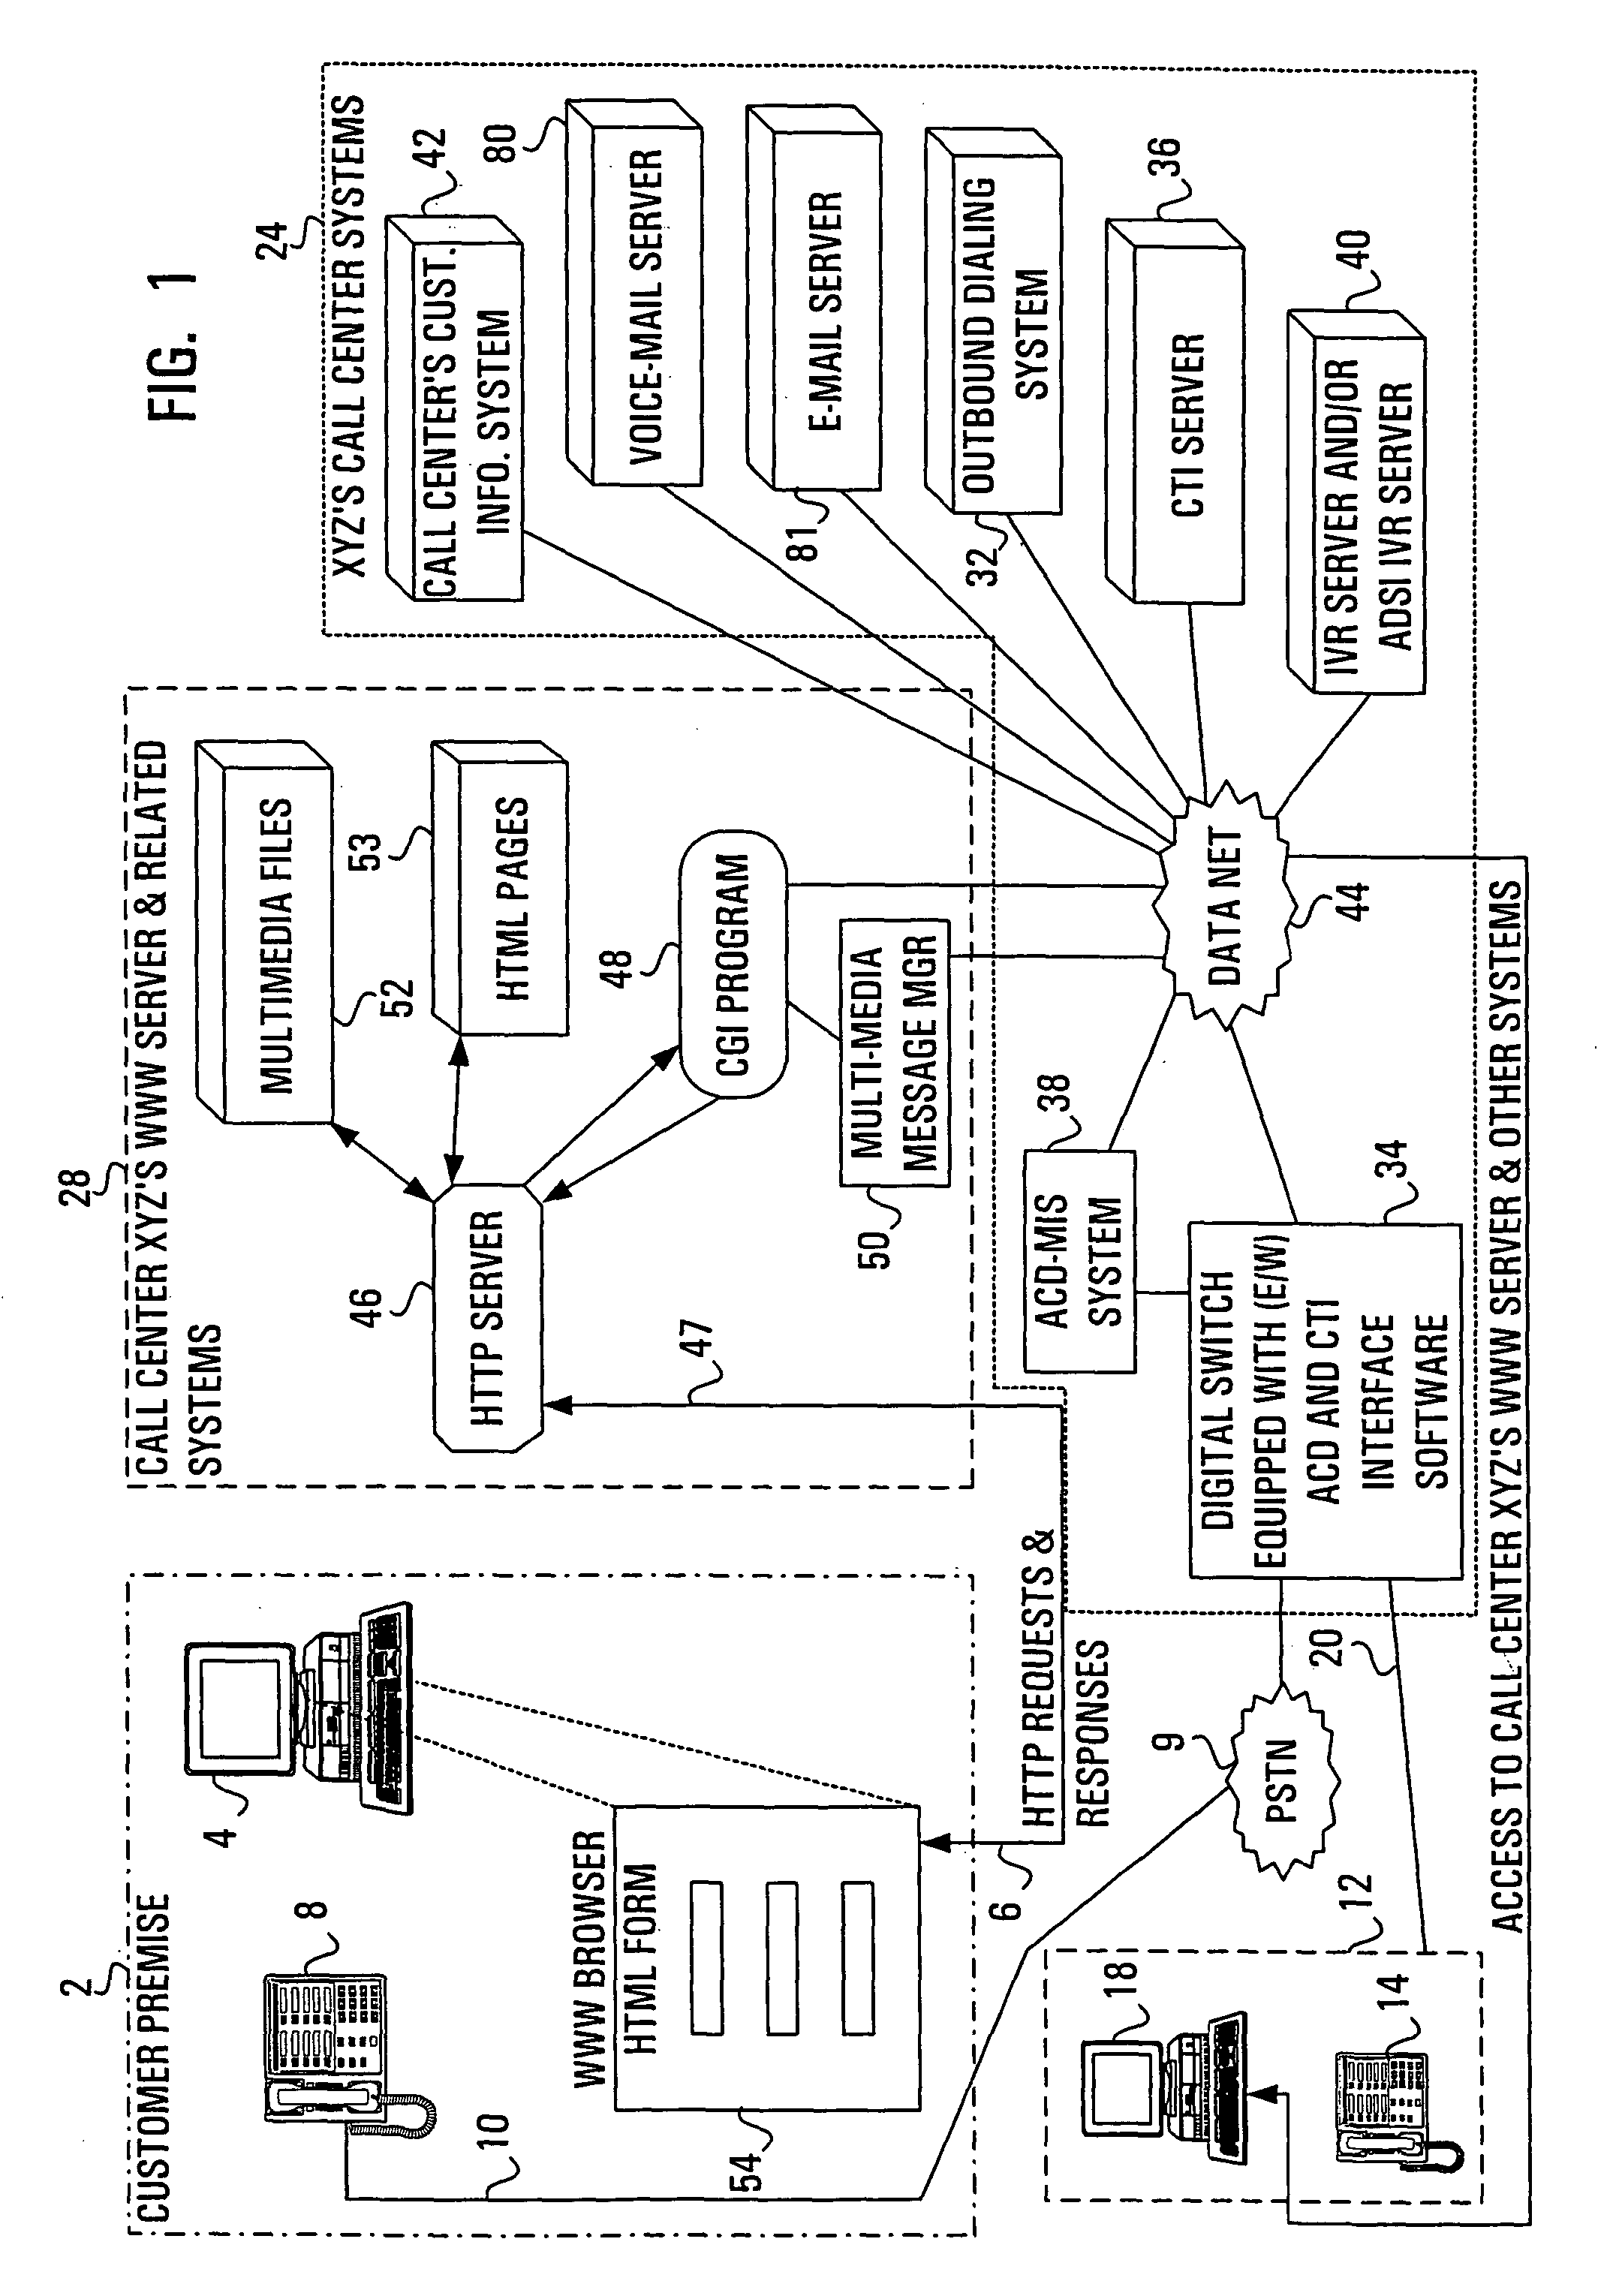 Method and system for coordinating data and voice communications via customer contact channel changing system